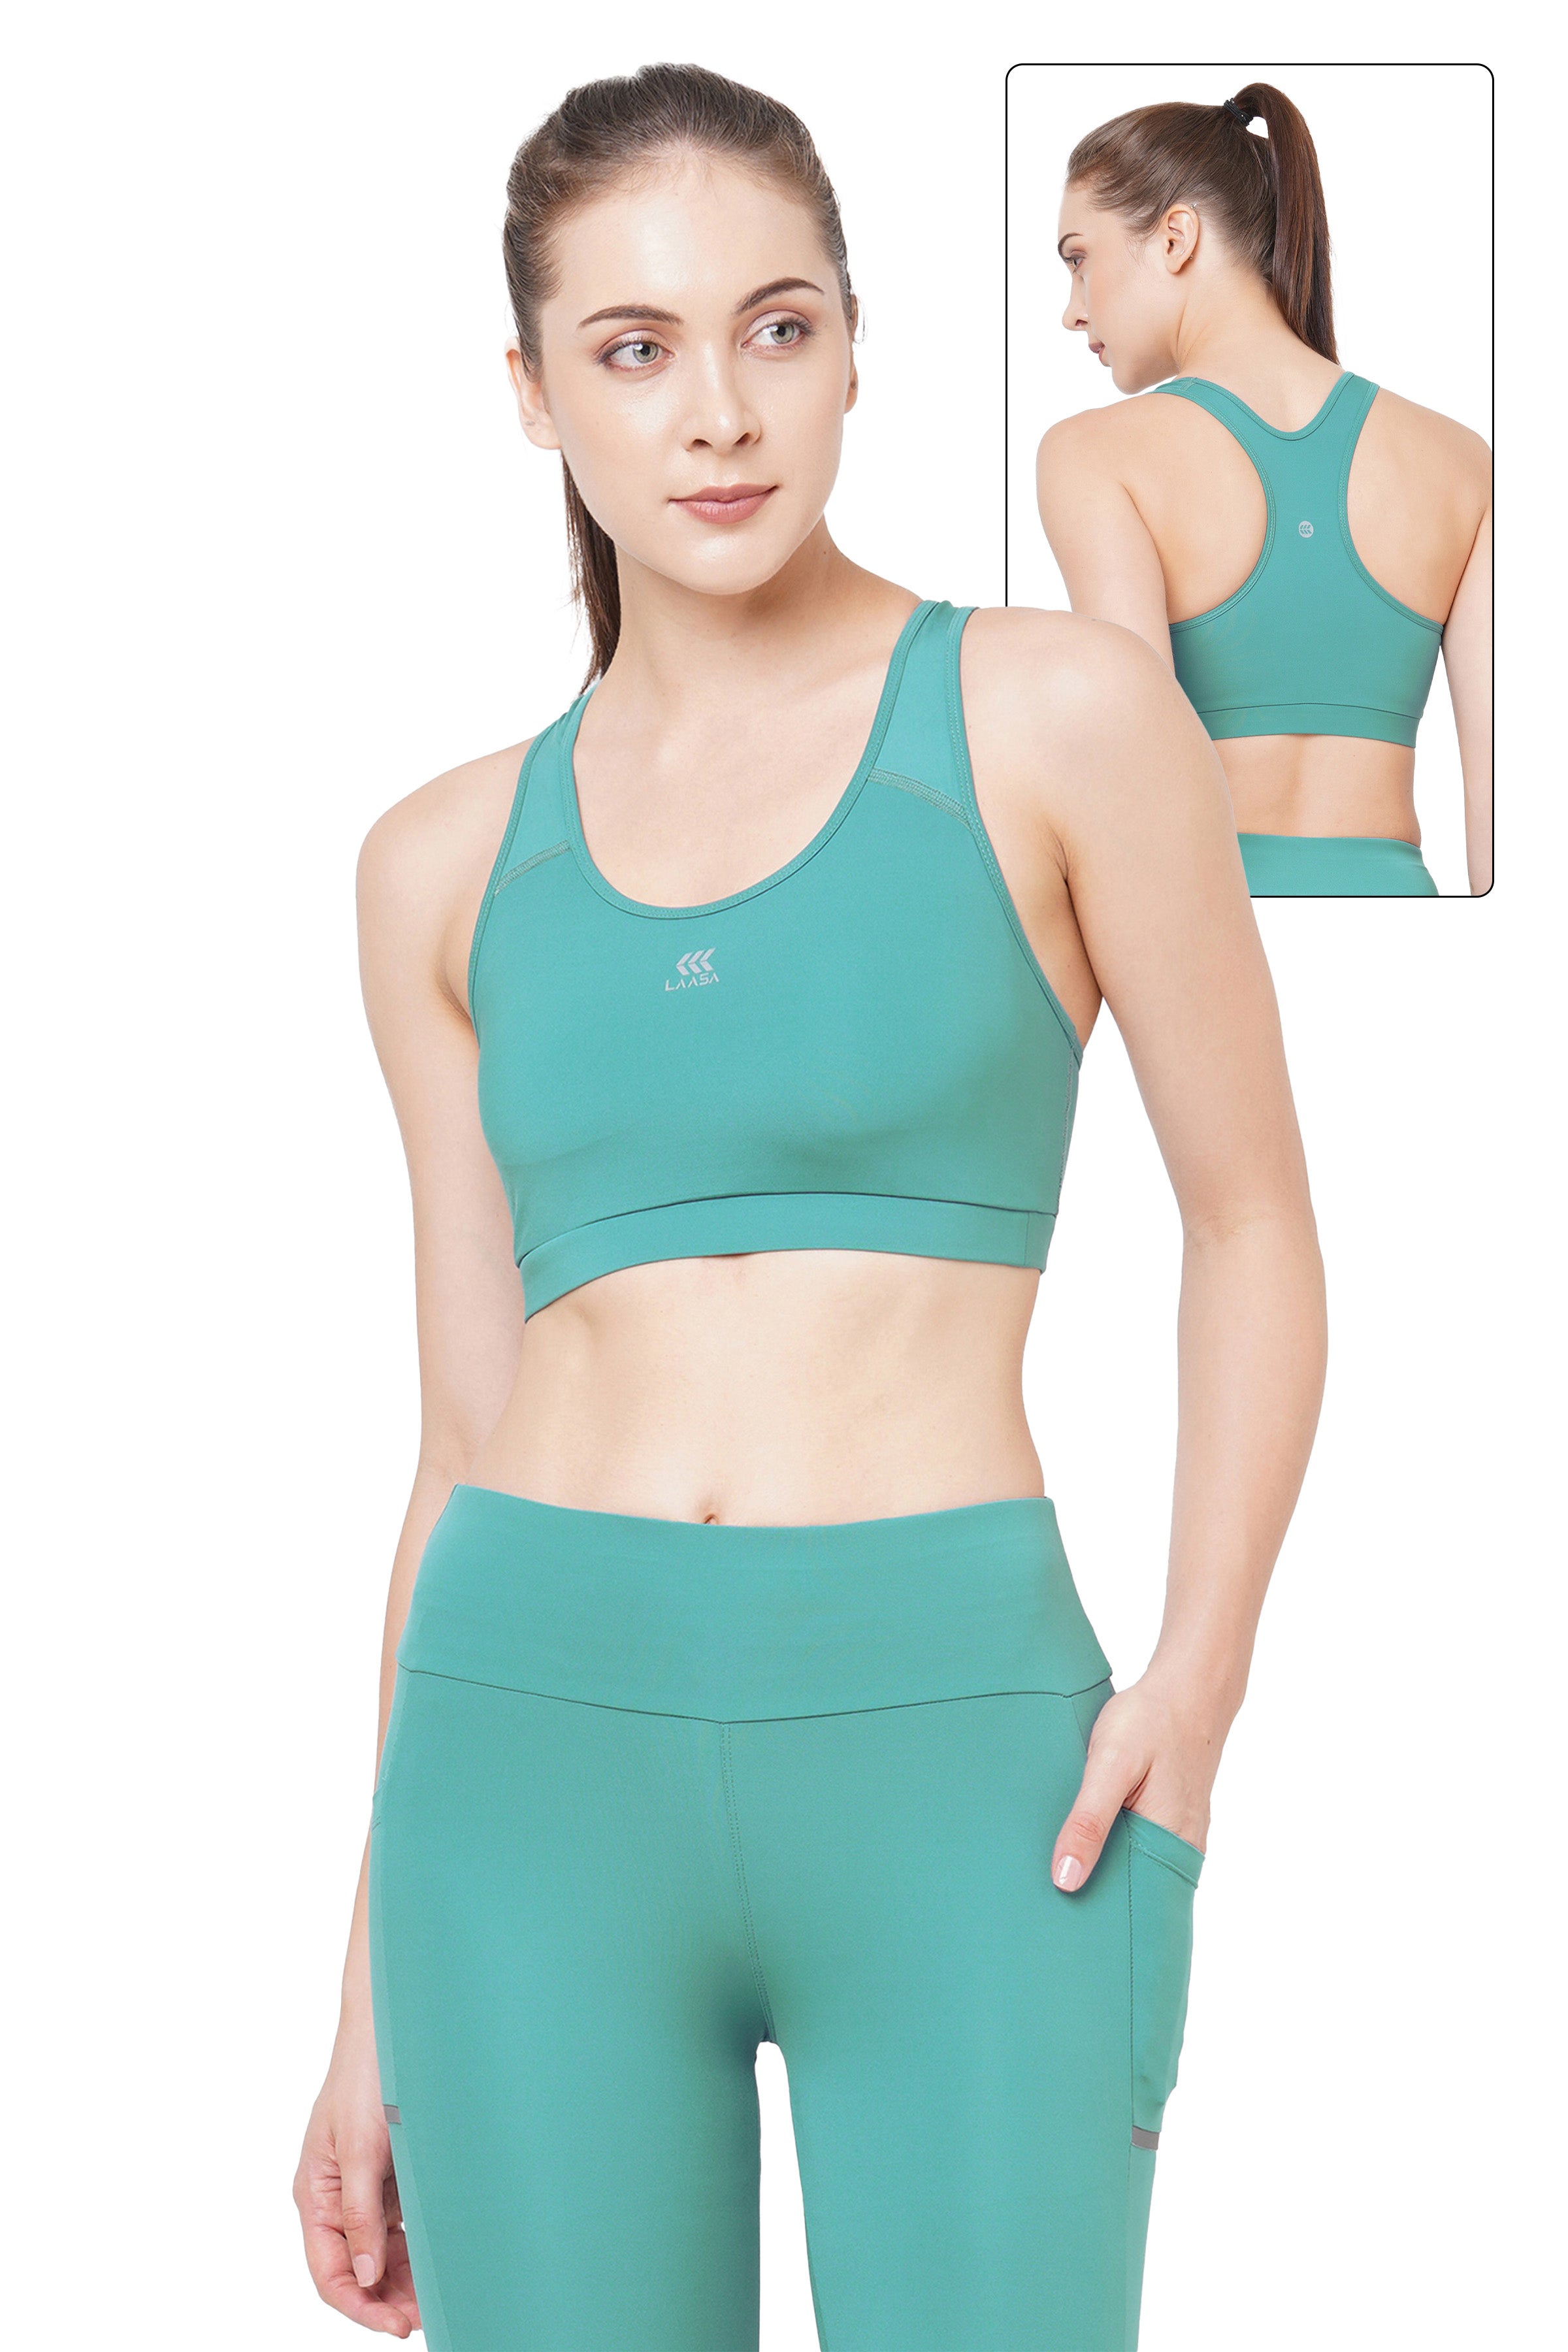 Laasa Sports JUST-DRY HIGH IMPACT HIIT COMPRESSION SPORTS BRA Women Sports  Lightly Padded Bra - Buy Laasa Sports JUST-DRY HIGH IMPACT HIIT COMPRESSION  SPORTS BRA Women Sports Lightly Padded Bra Online at